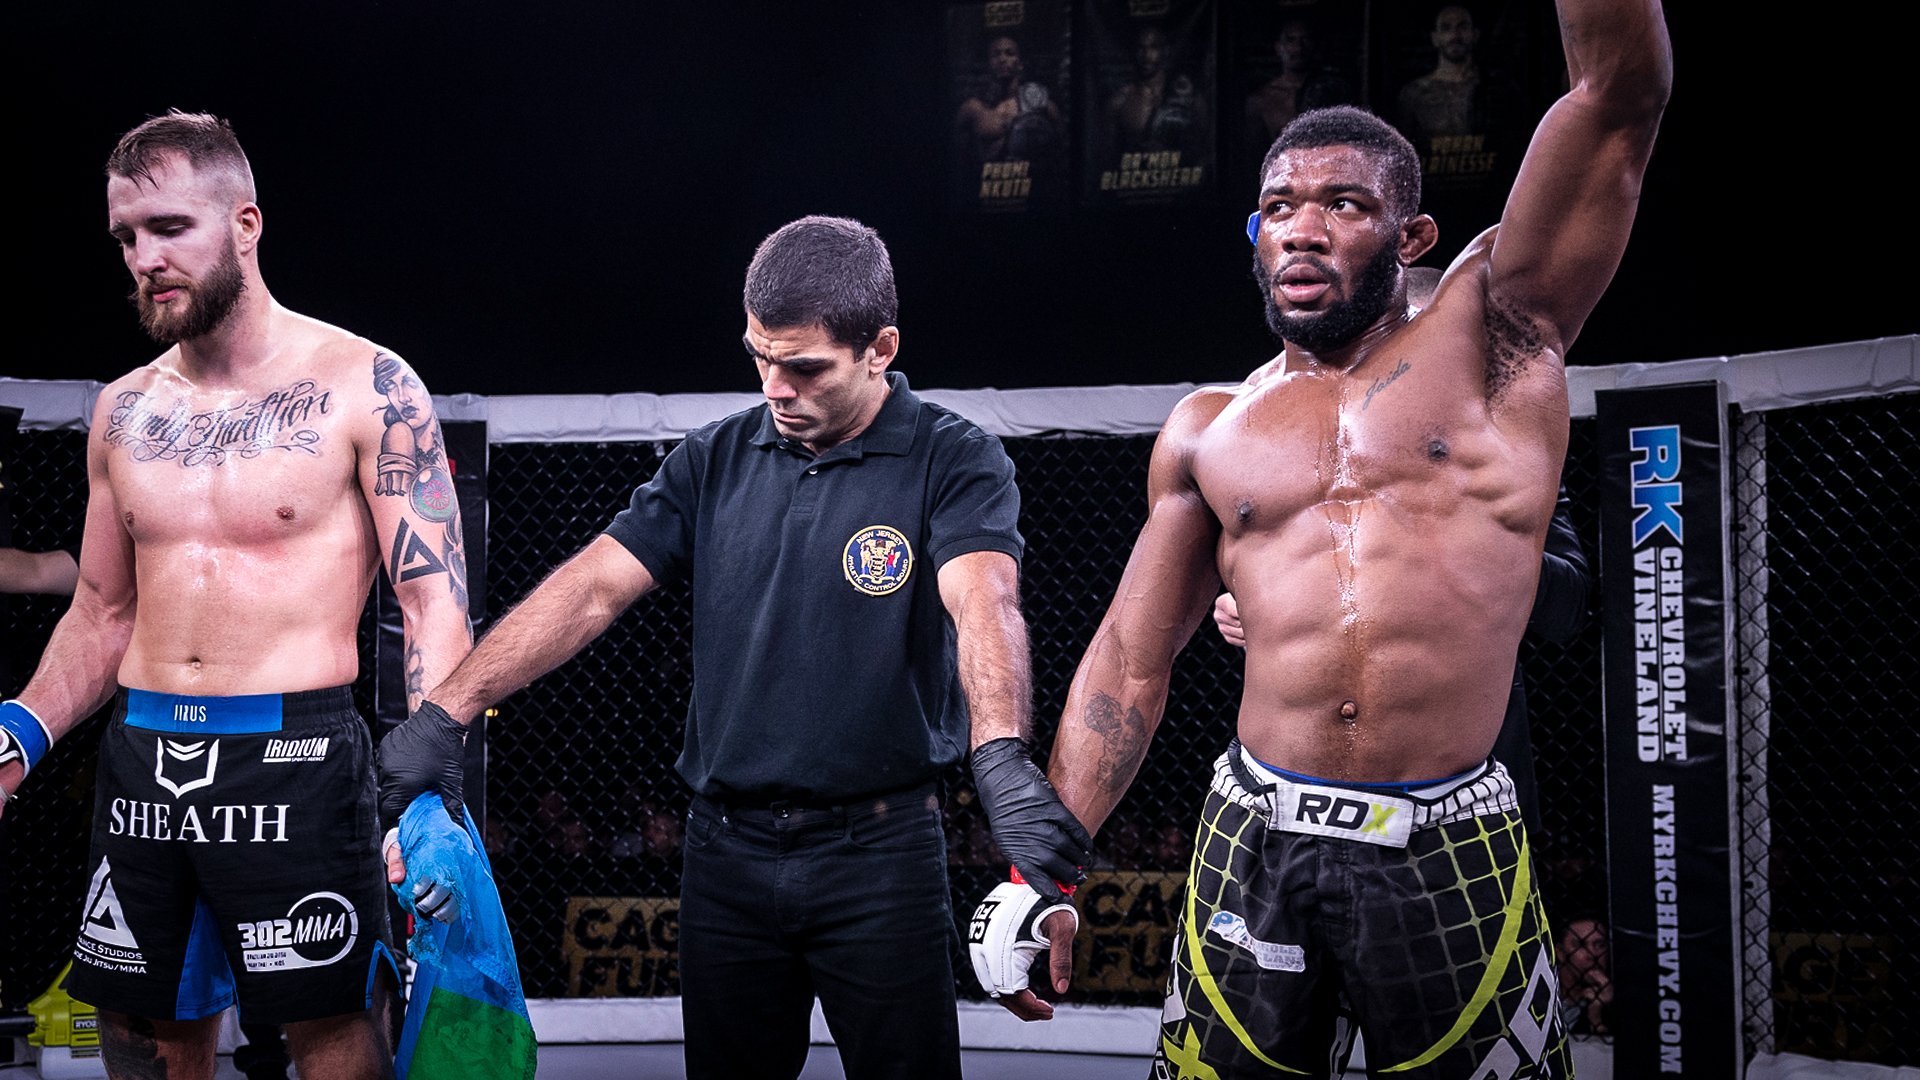 Undefeated Miles Lee anxious to show true skills in CFFC 111 bid for middleweight title — Cage Fury Fighting Championships